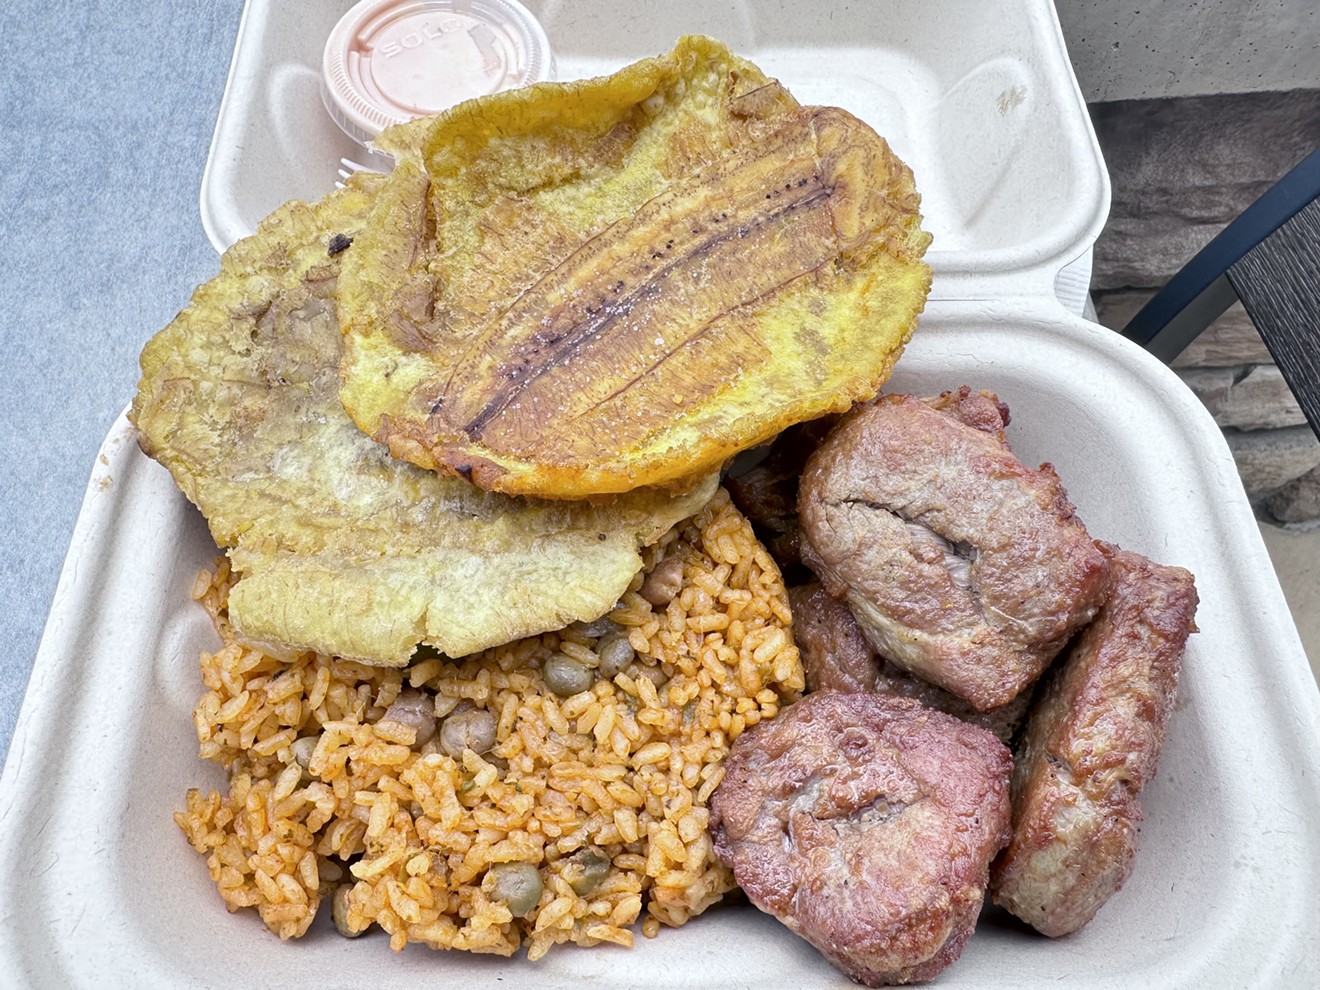 The Puerto Rican Bowl is served over arroz con gandules (pigeon peas rice) with a side of tostones.